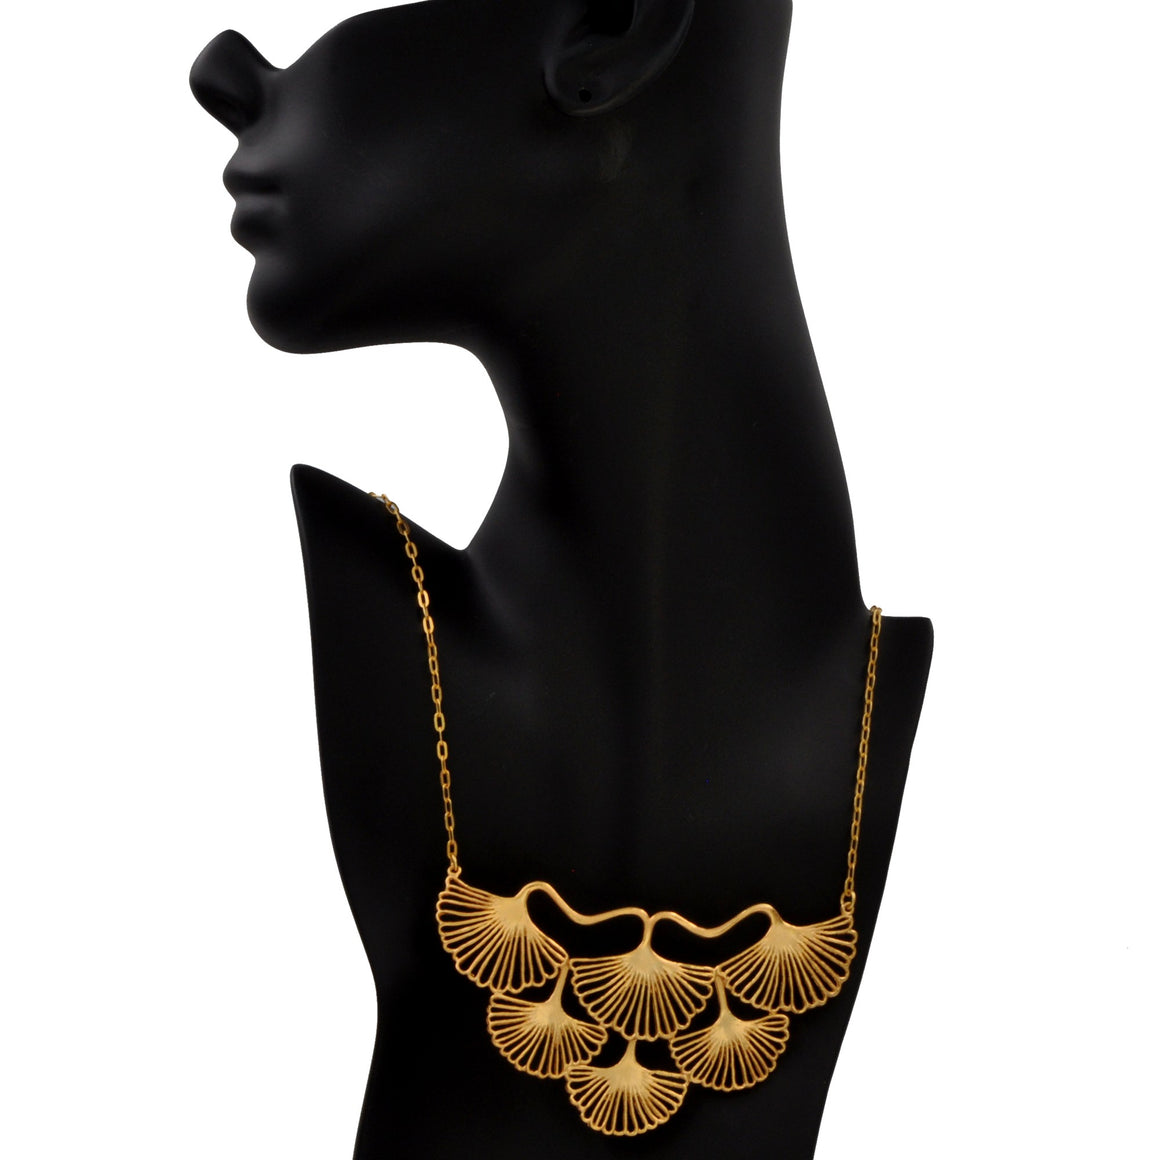 Ginkgo Collar Necklace - 24K Gold Plated